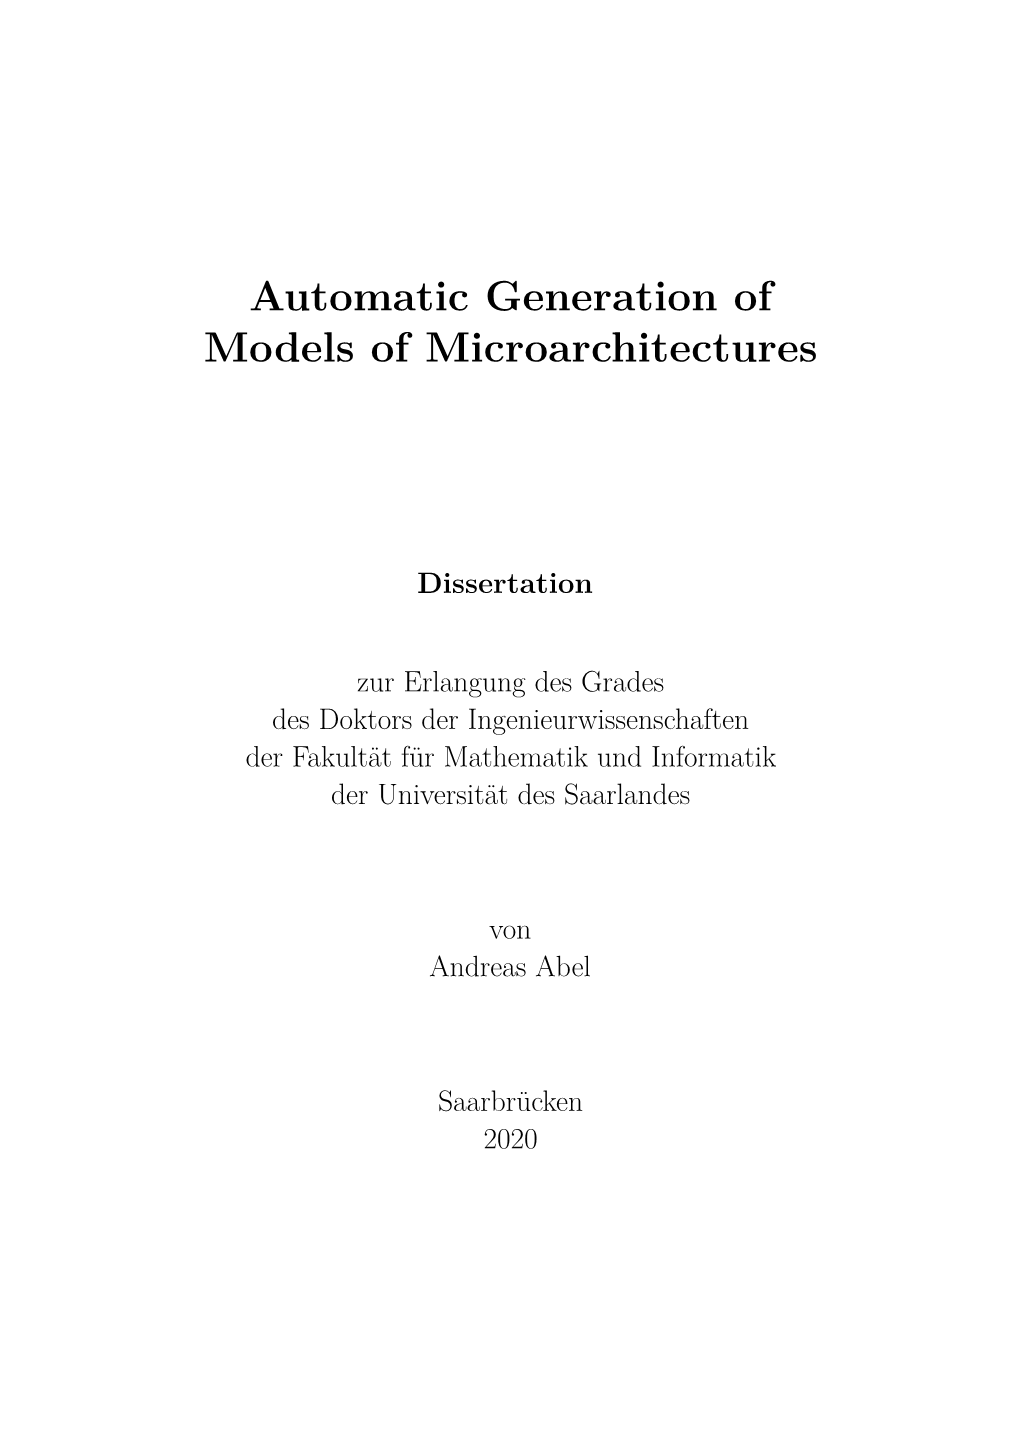 Automatic Generation of Models of Microarchitectures